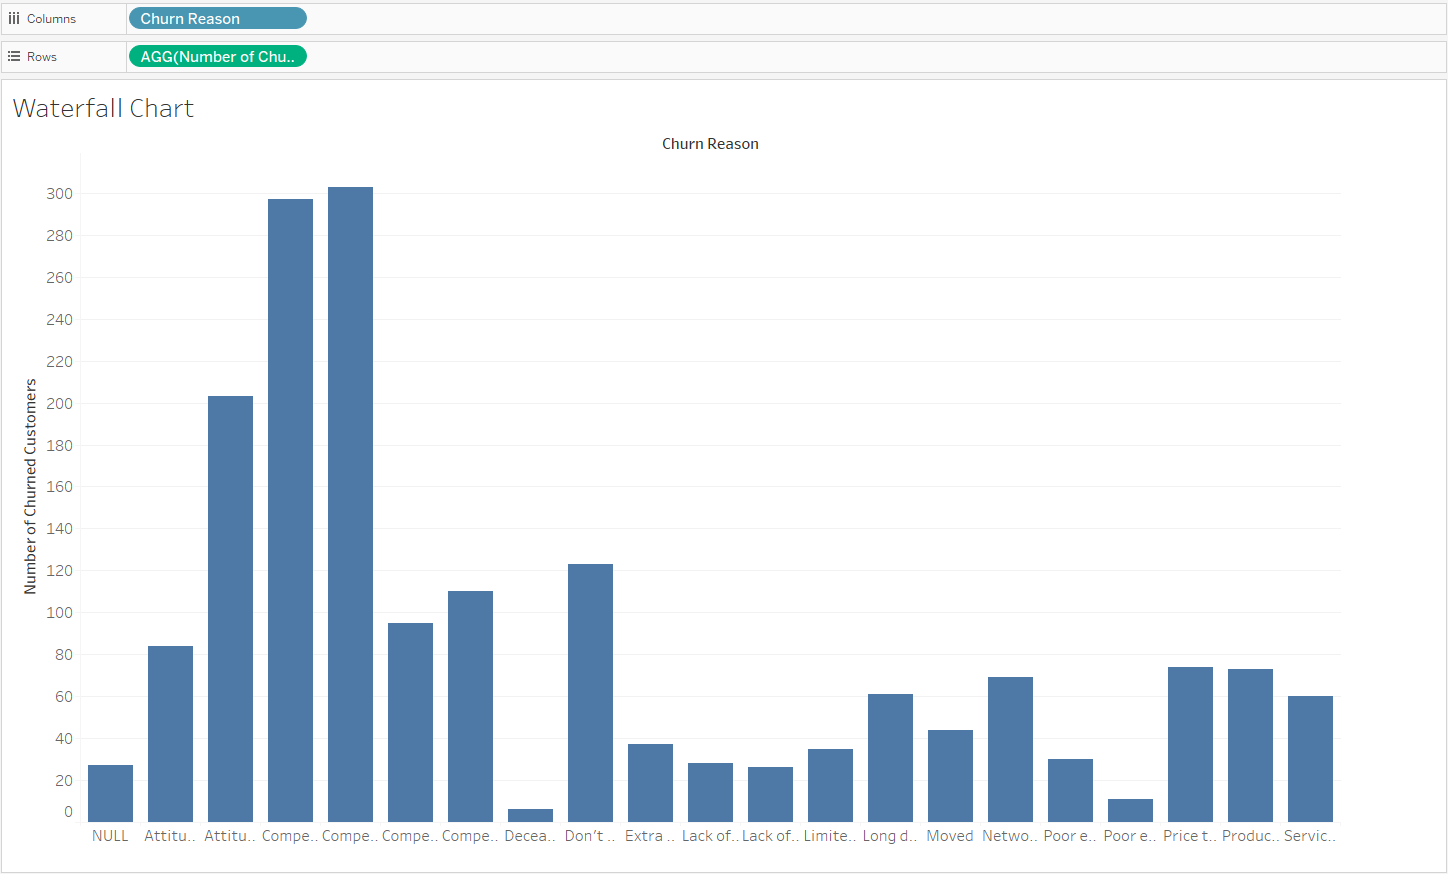 how to create a bar chart in Tableau